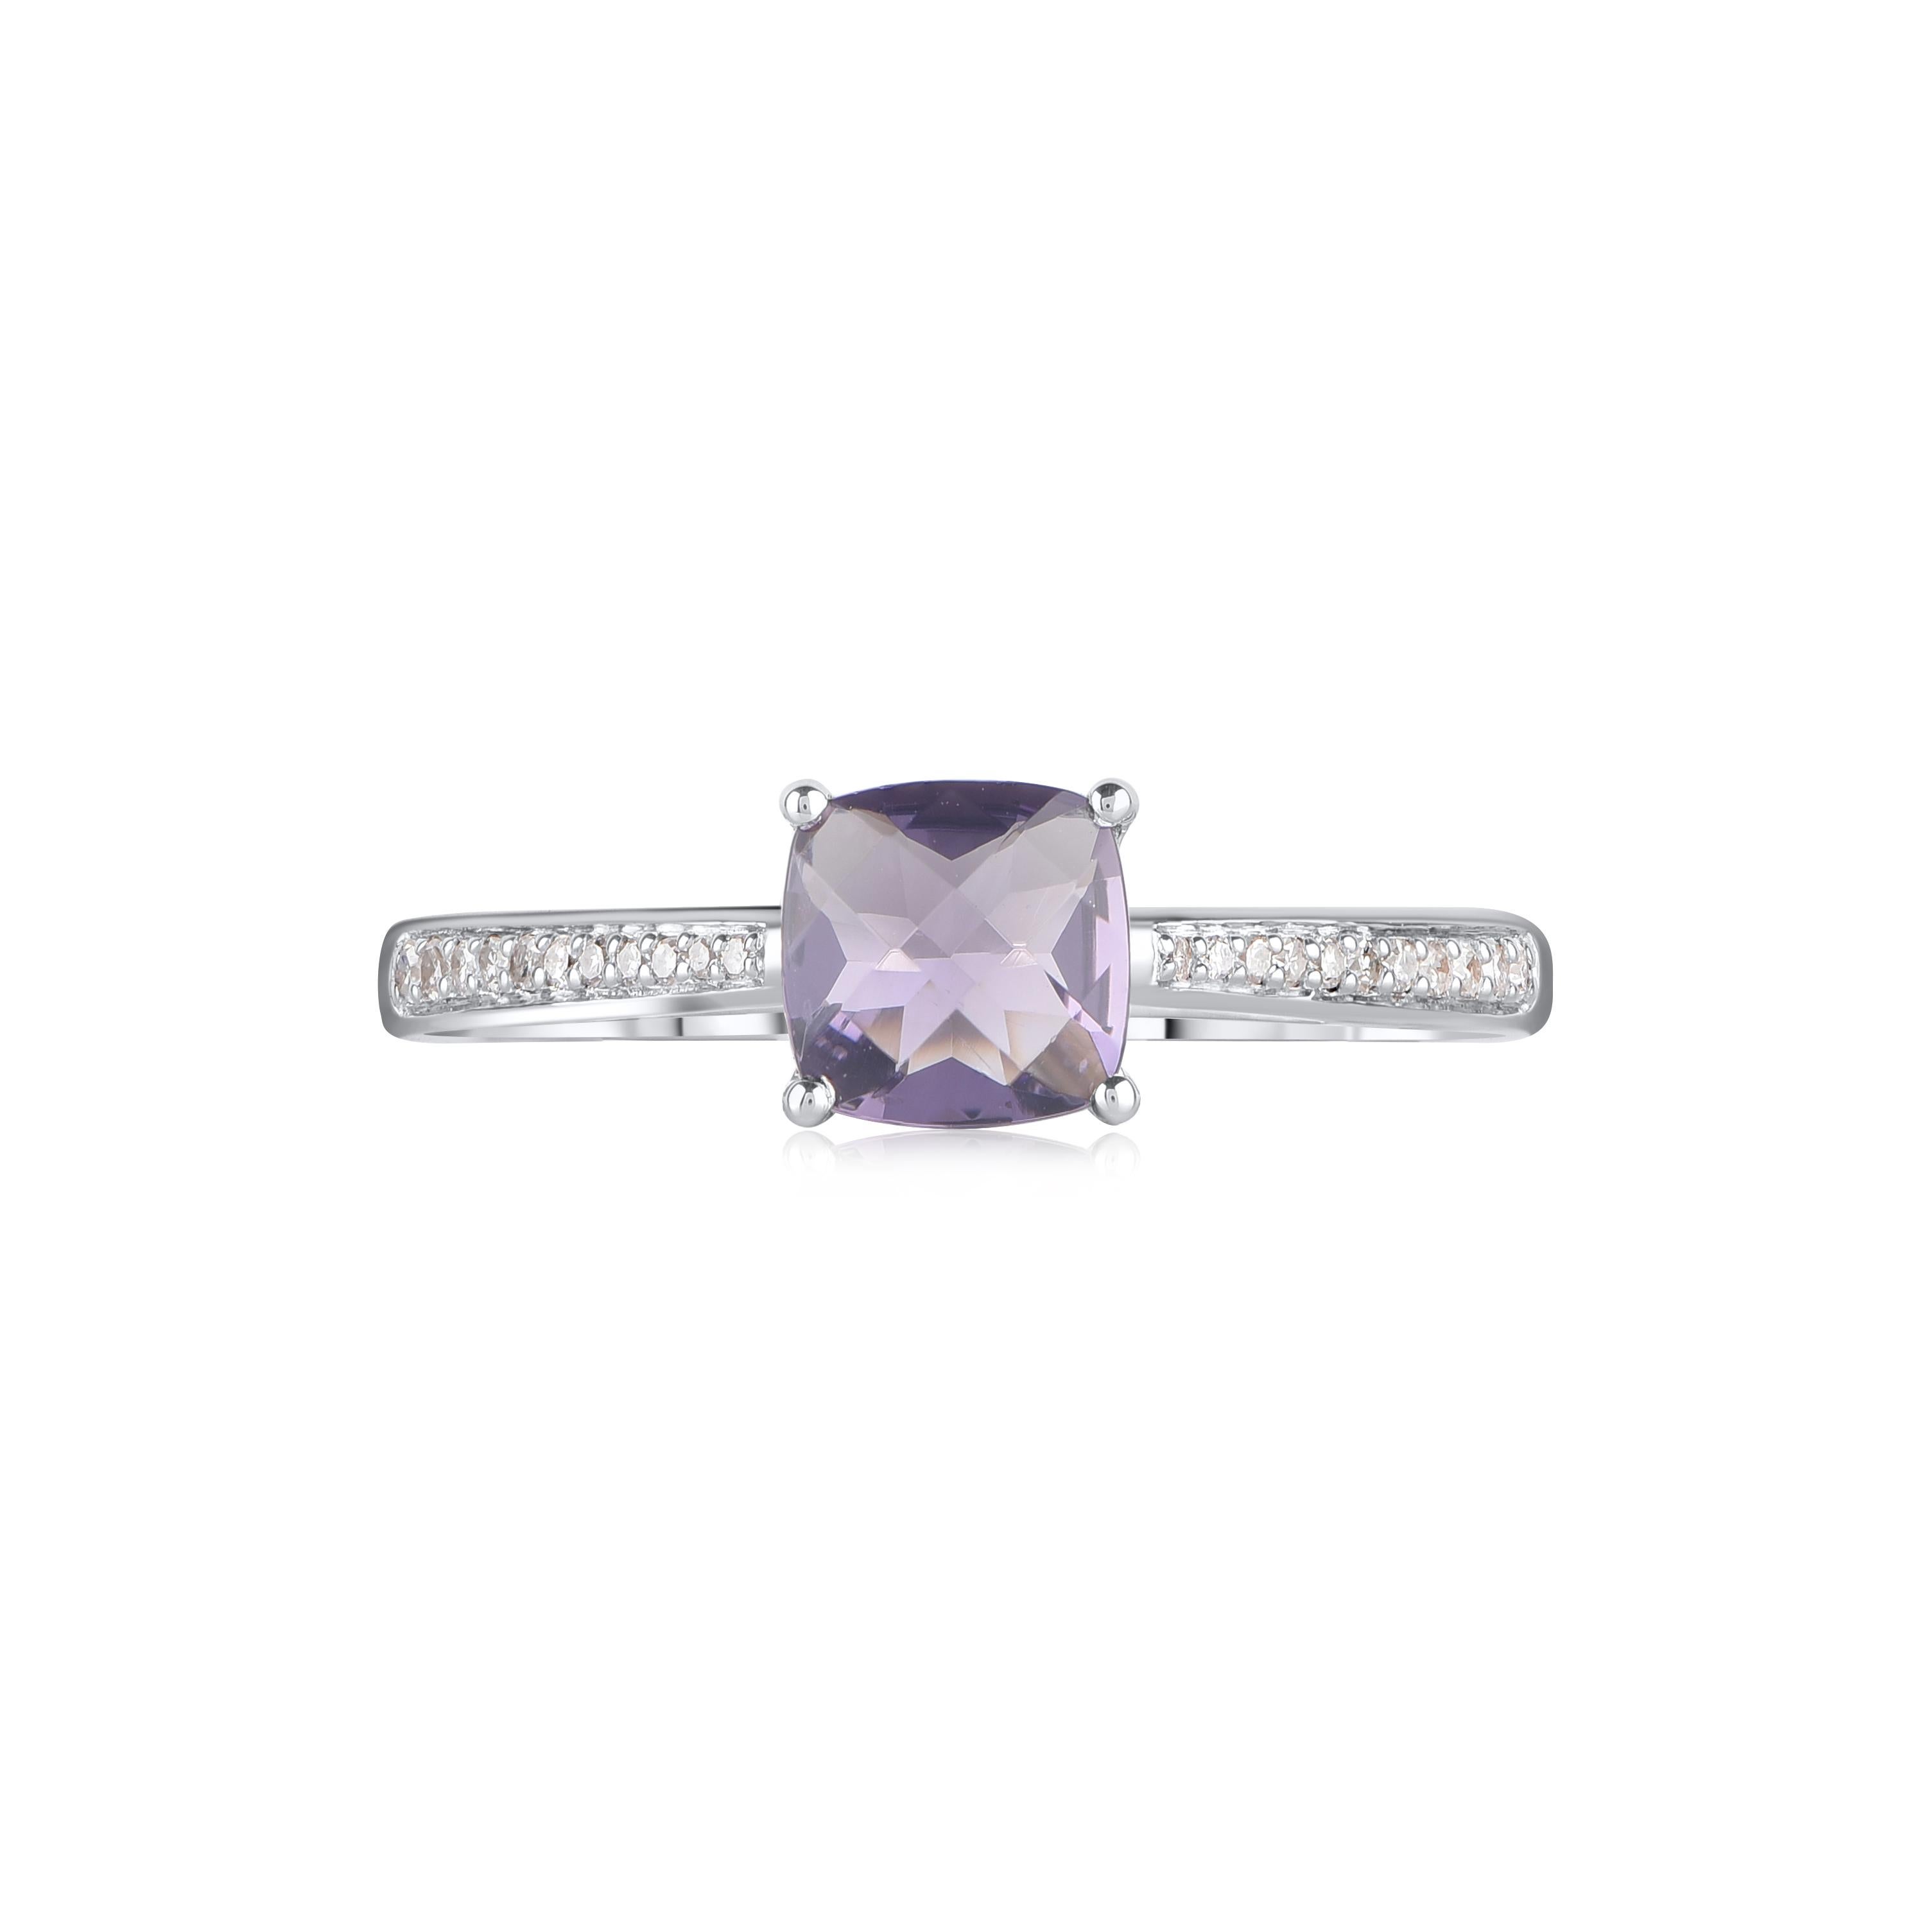 Bring charm to your look with this cushion cut amethyst classic and modern ring. Beautifully crafted by our inhouse experts in 14 karat white gold and embellished with 22 single cut round white diamond and 1 cushion shape amethyst set in pave &